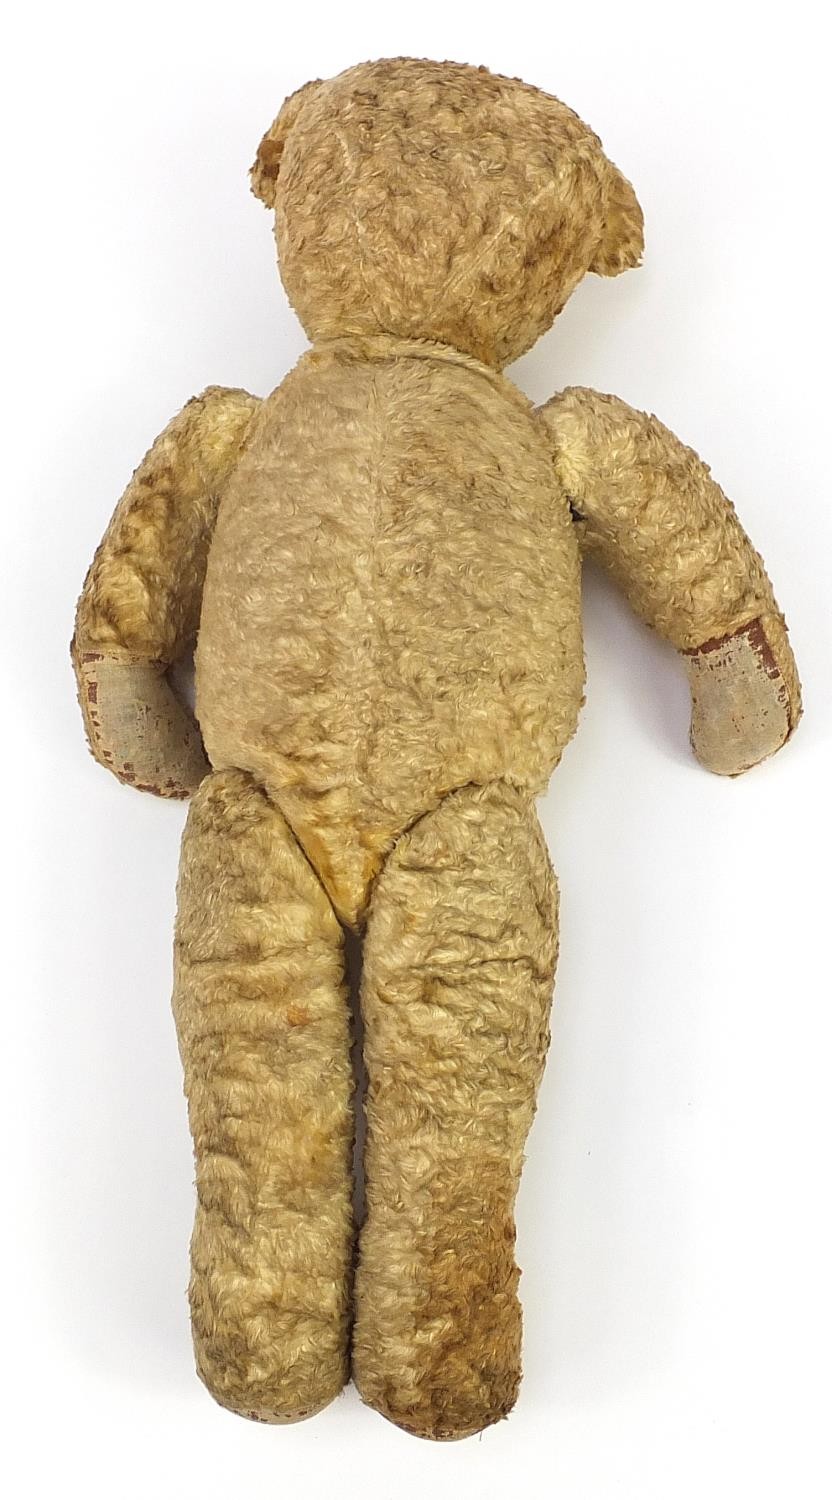 Vintage golden teddy bear with jointed limbs, 72cm high - Image 2 of 3